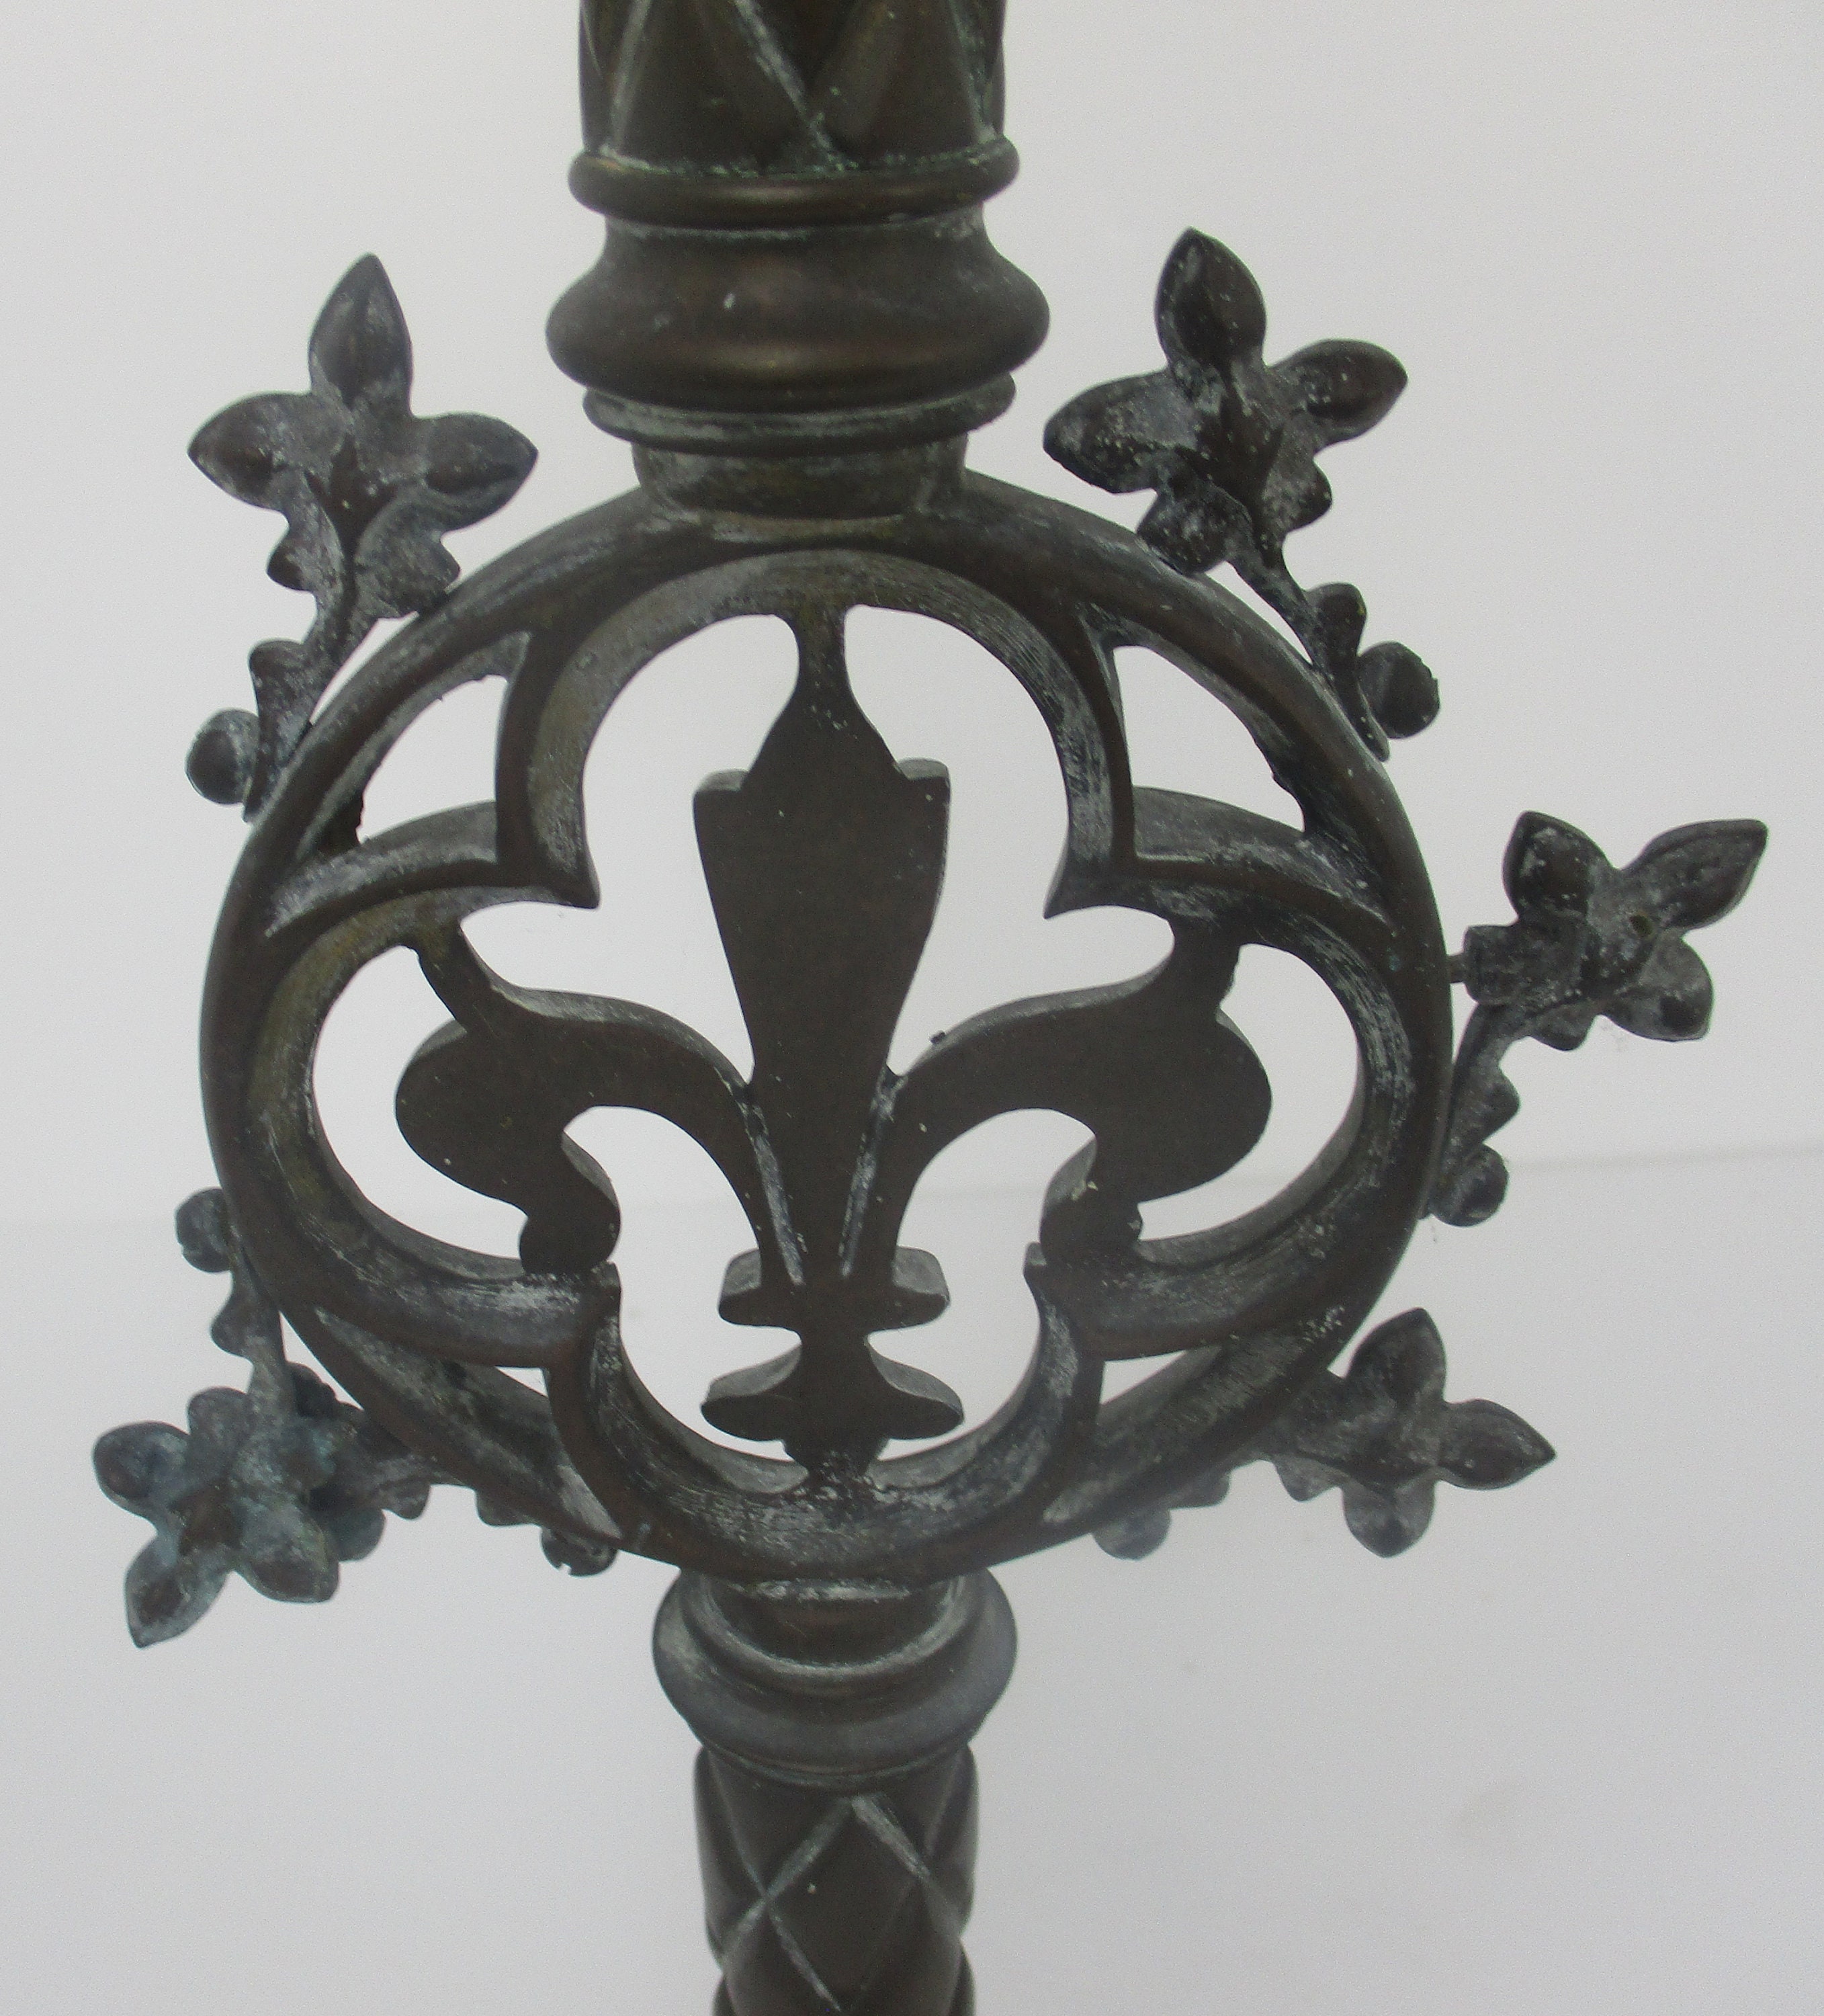 Antique Candle Holder Candle stick Church Chapel Altar Monastery